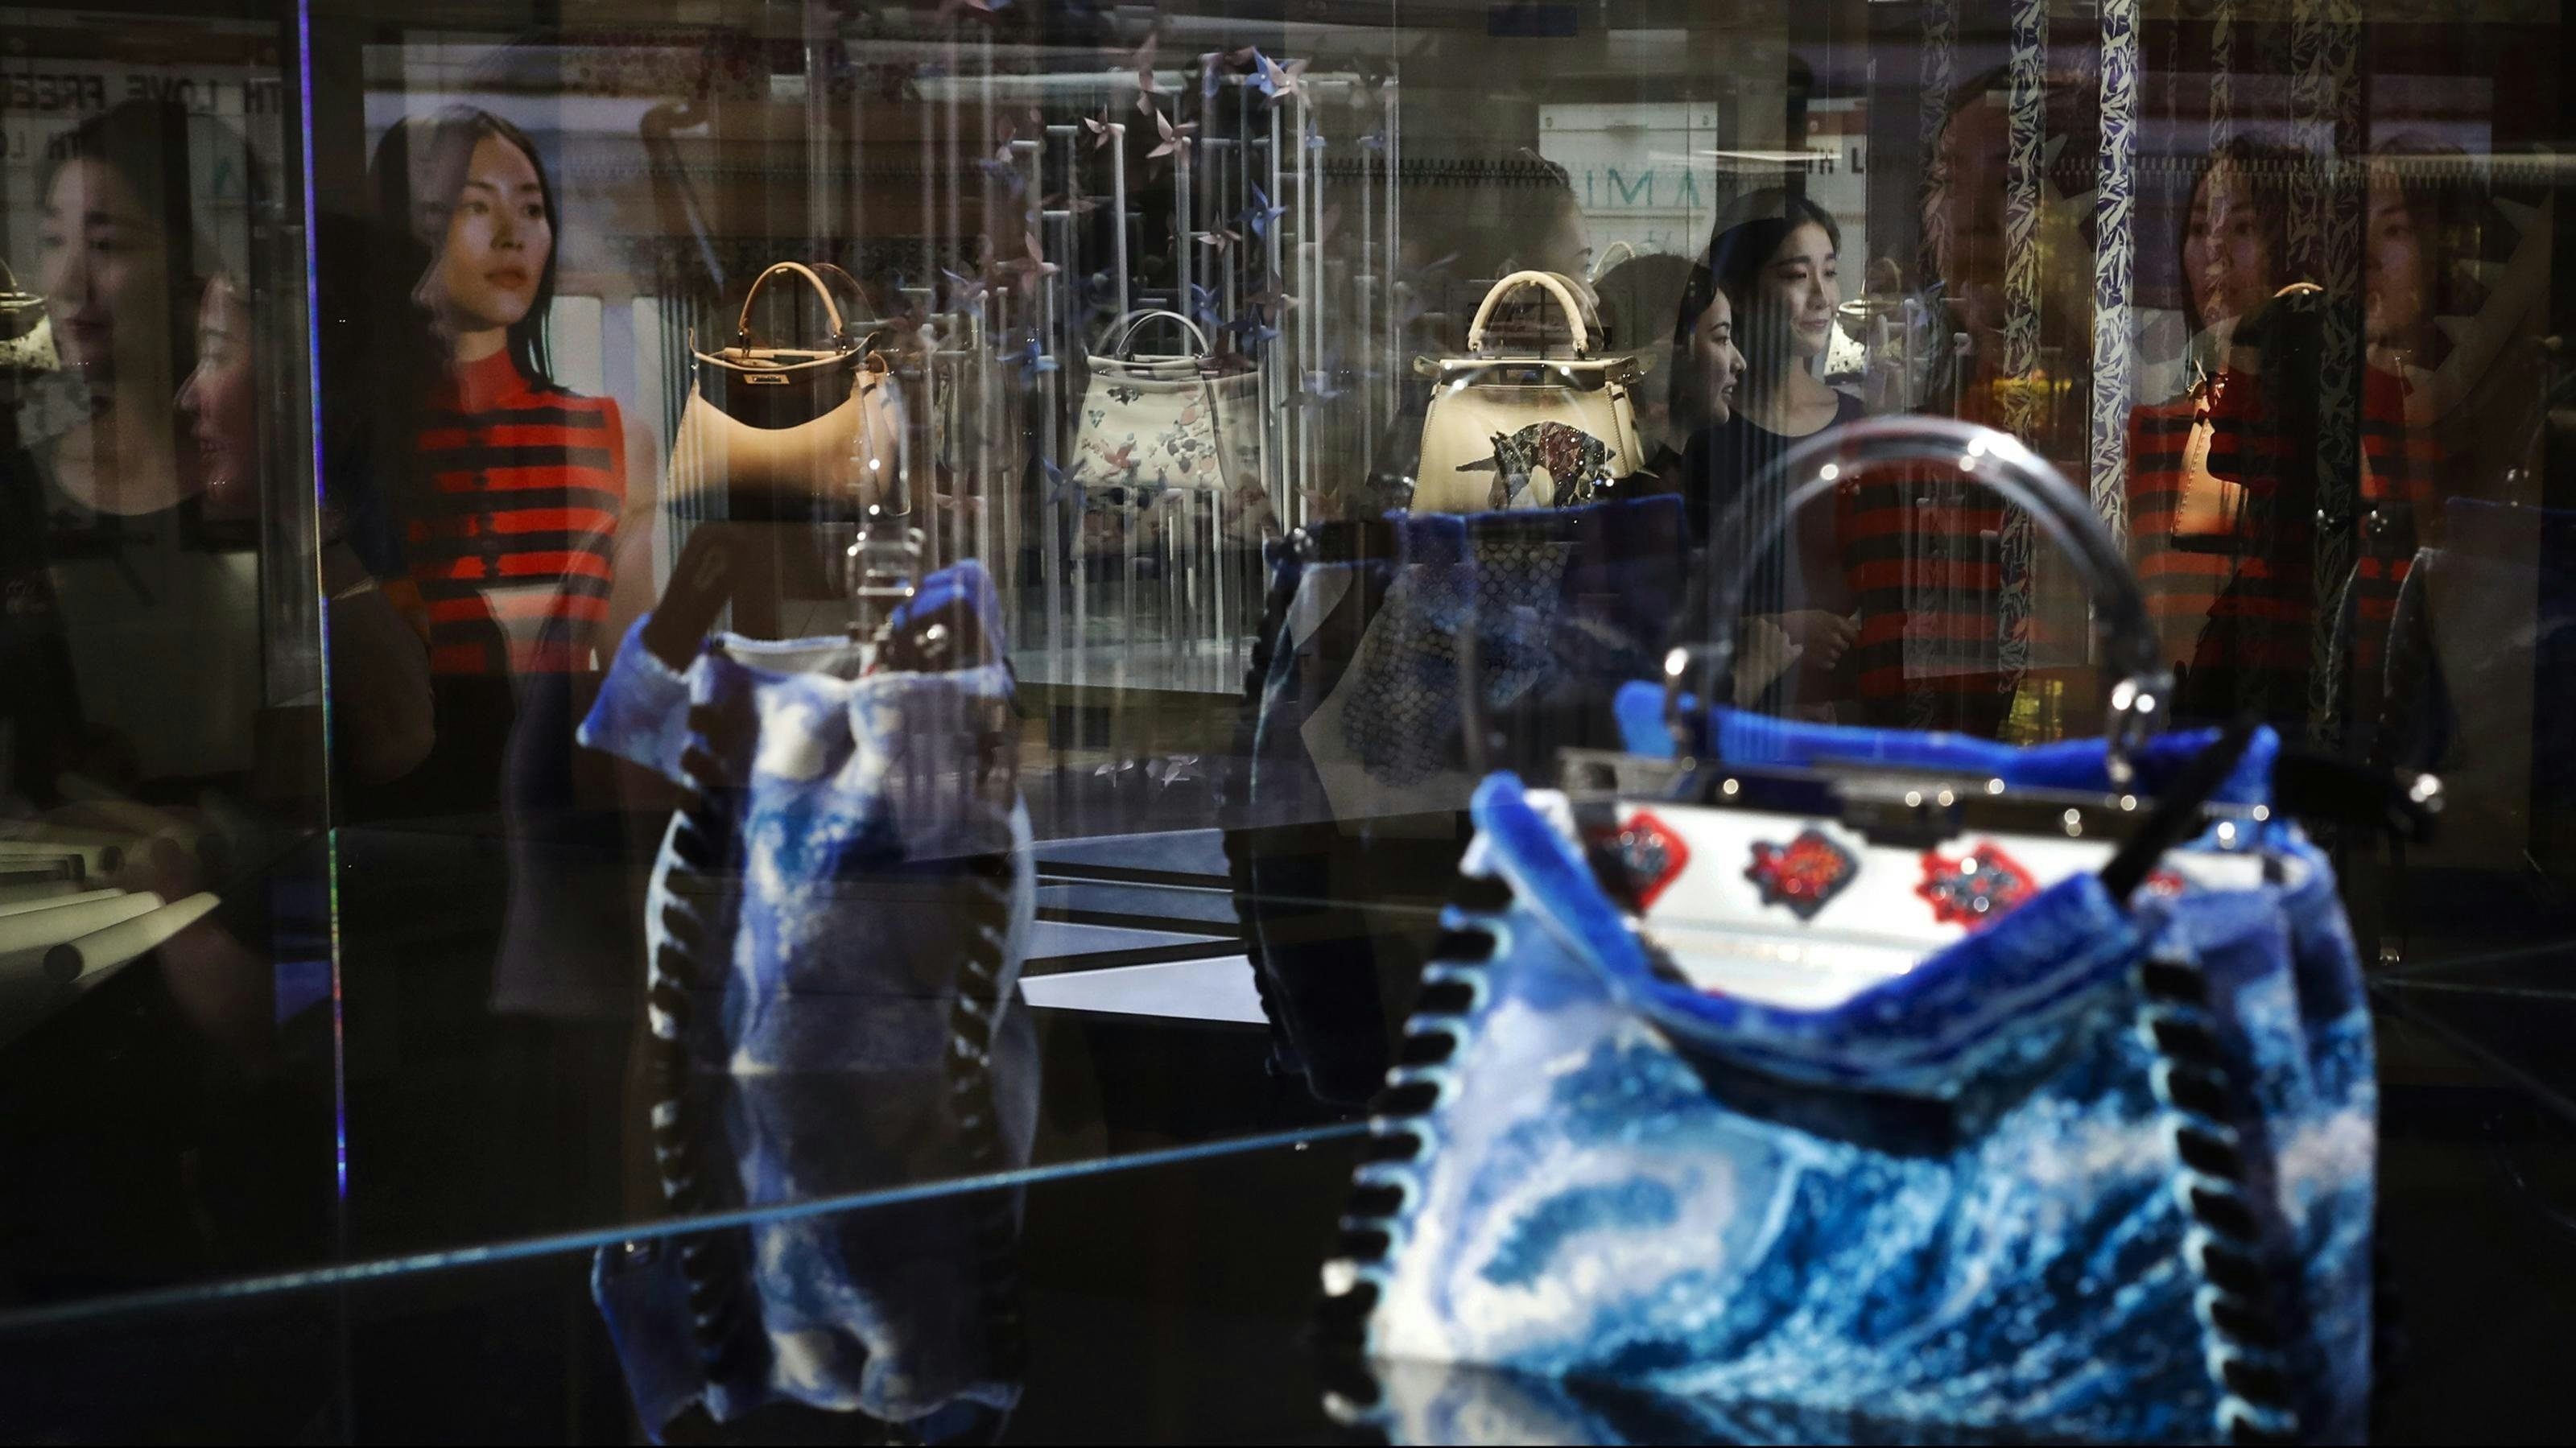 Luxury labels are increasingly launching digital flagships on Tmall.
Photo: AP/Andy Wong